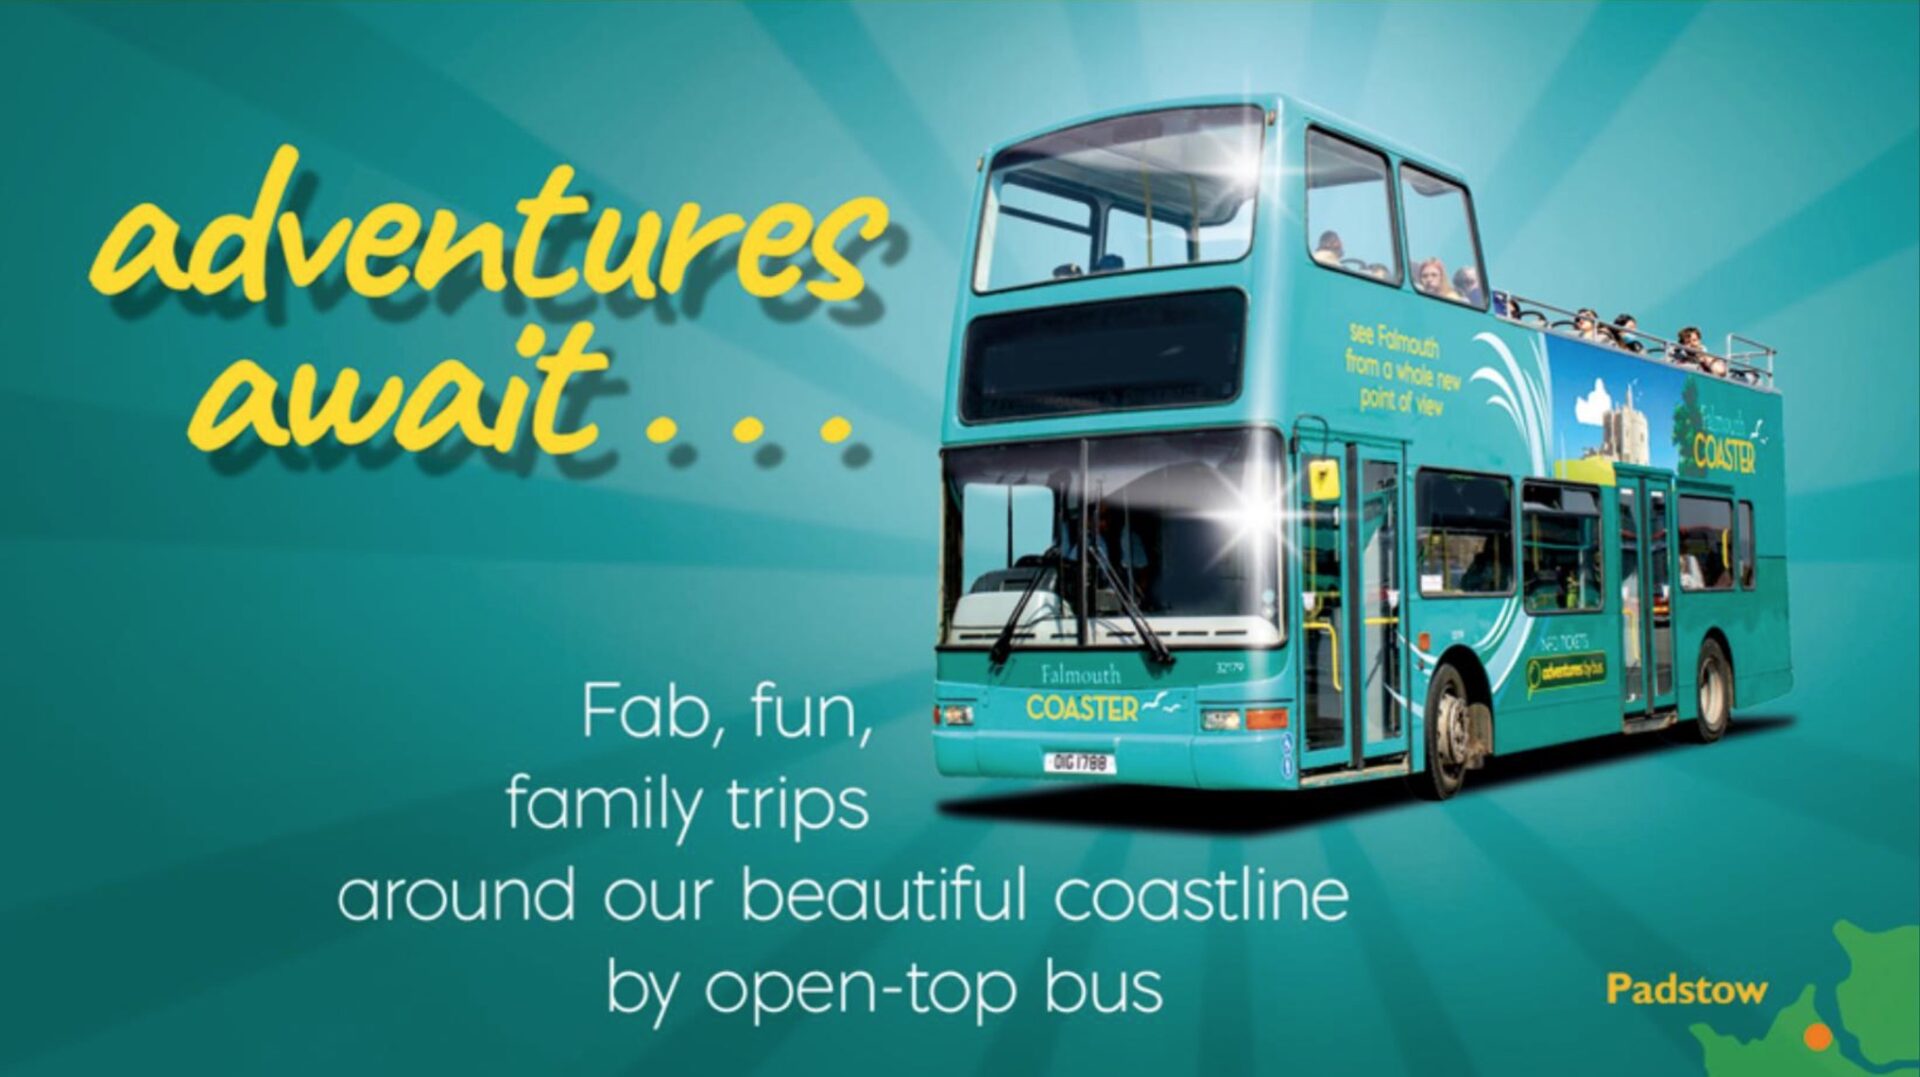 There’s still time for Summer adventures: Go by bus